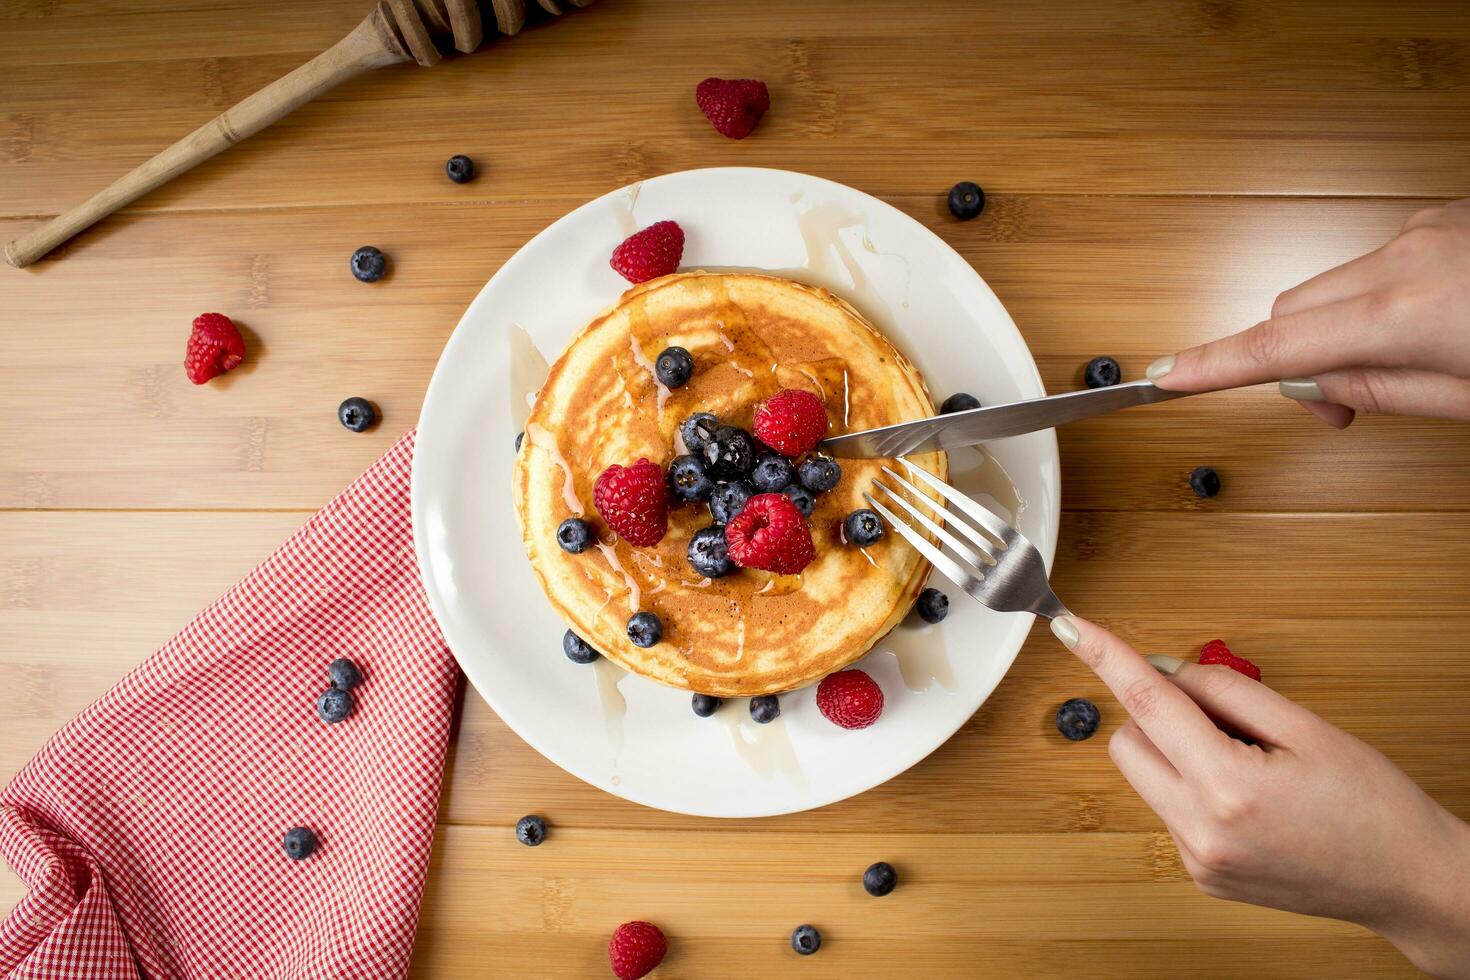 eating blueberry pancakes - hands of young woman photo